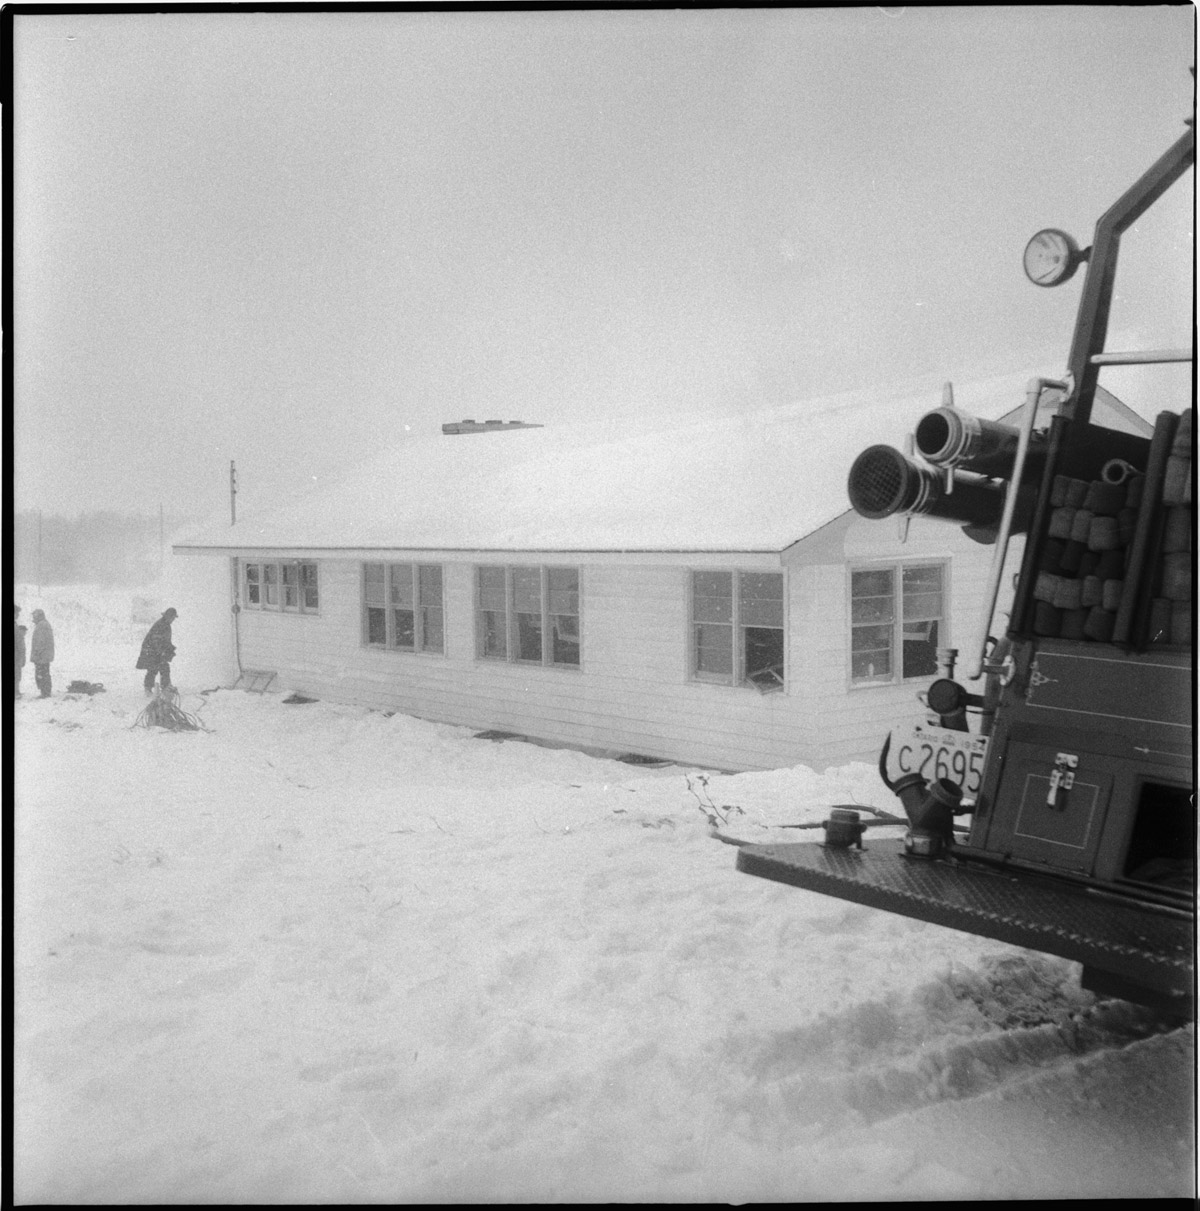 Thames Valley Club House covered in snow with firetruck in the fore ground